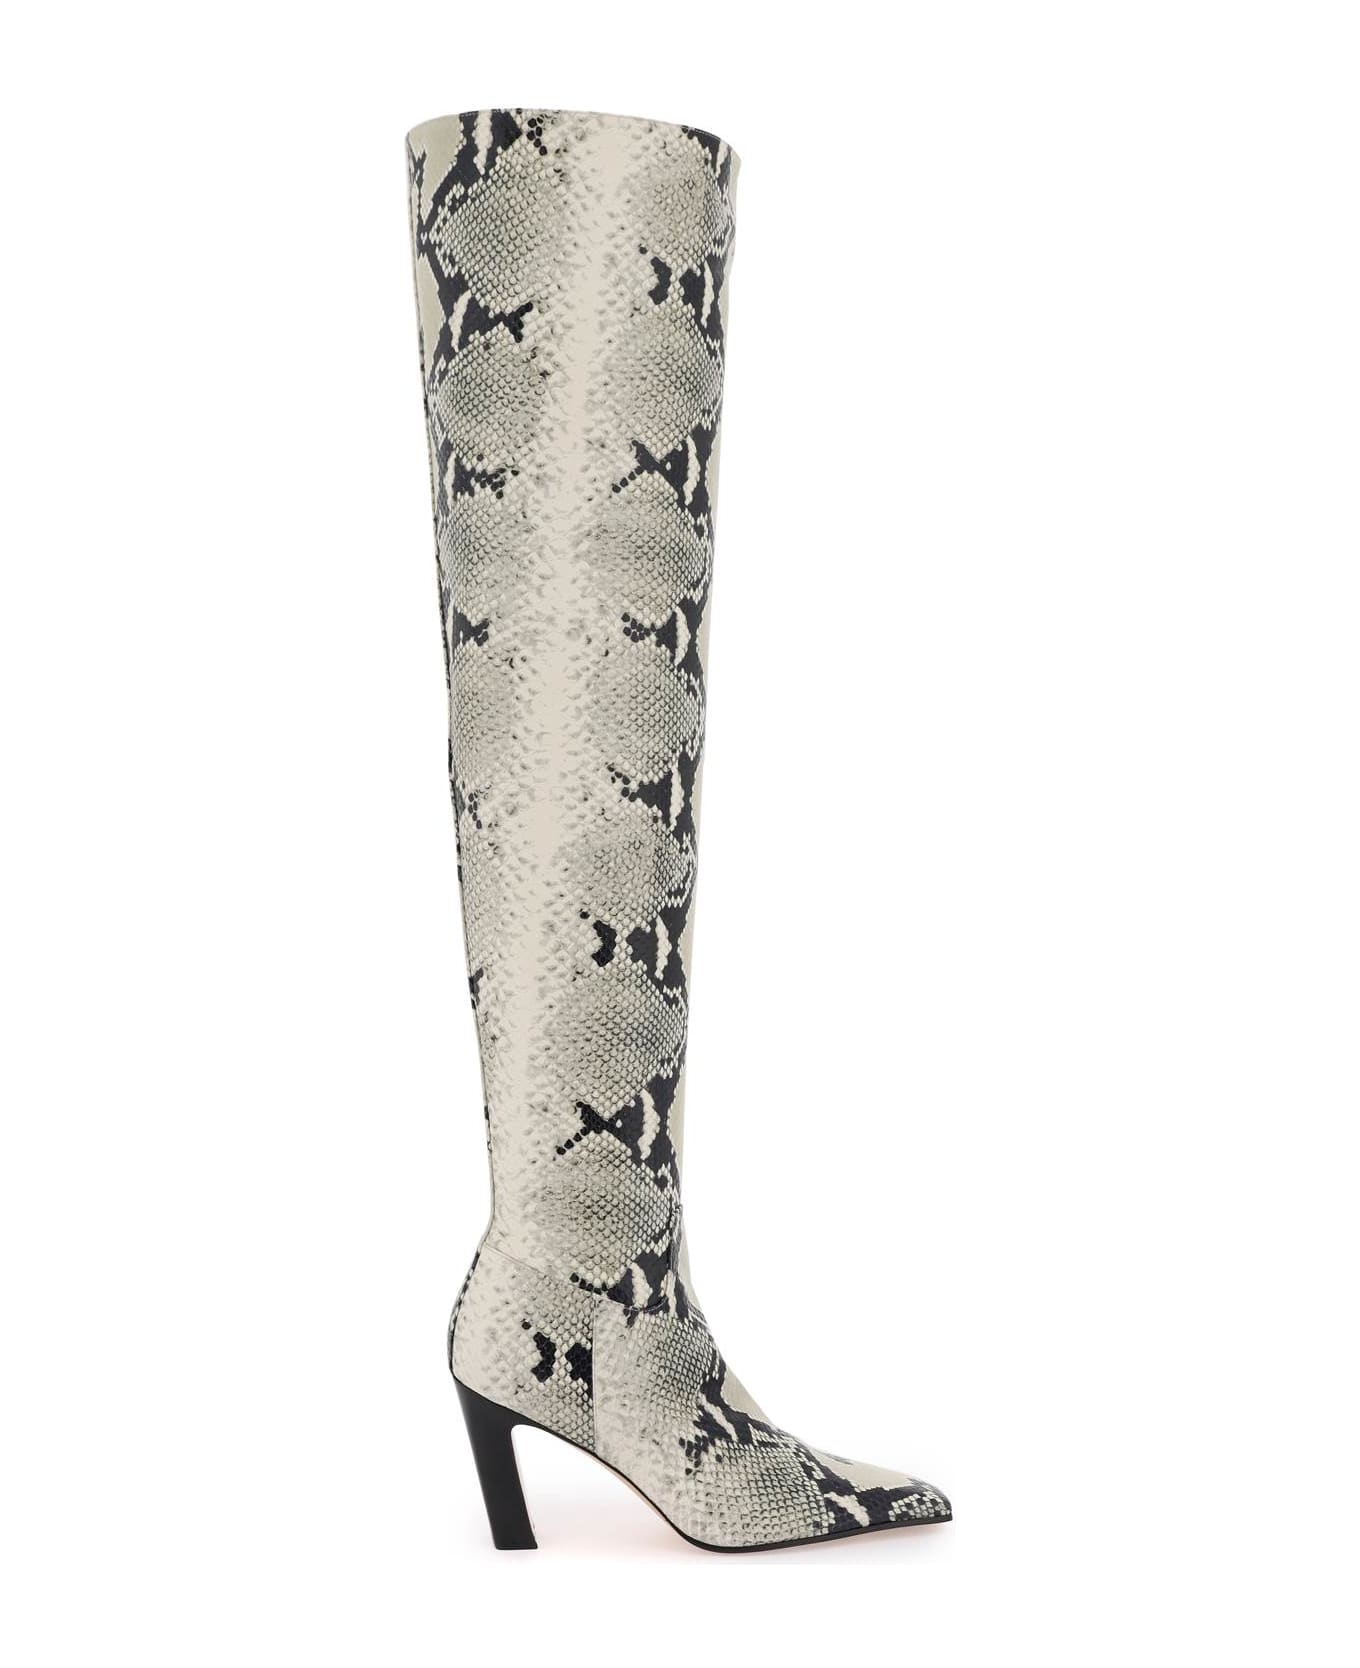 Khaite Printed Leather The Marfa Boots - NATURAL (Grey)